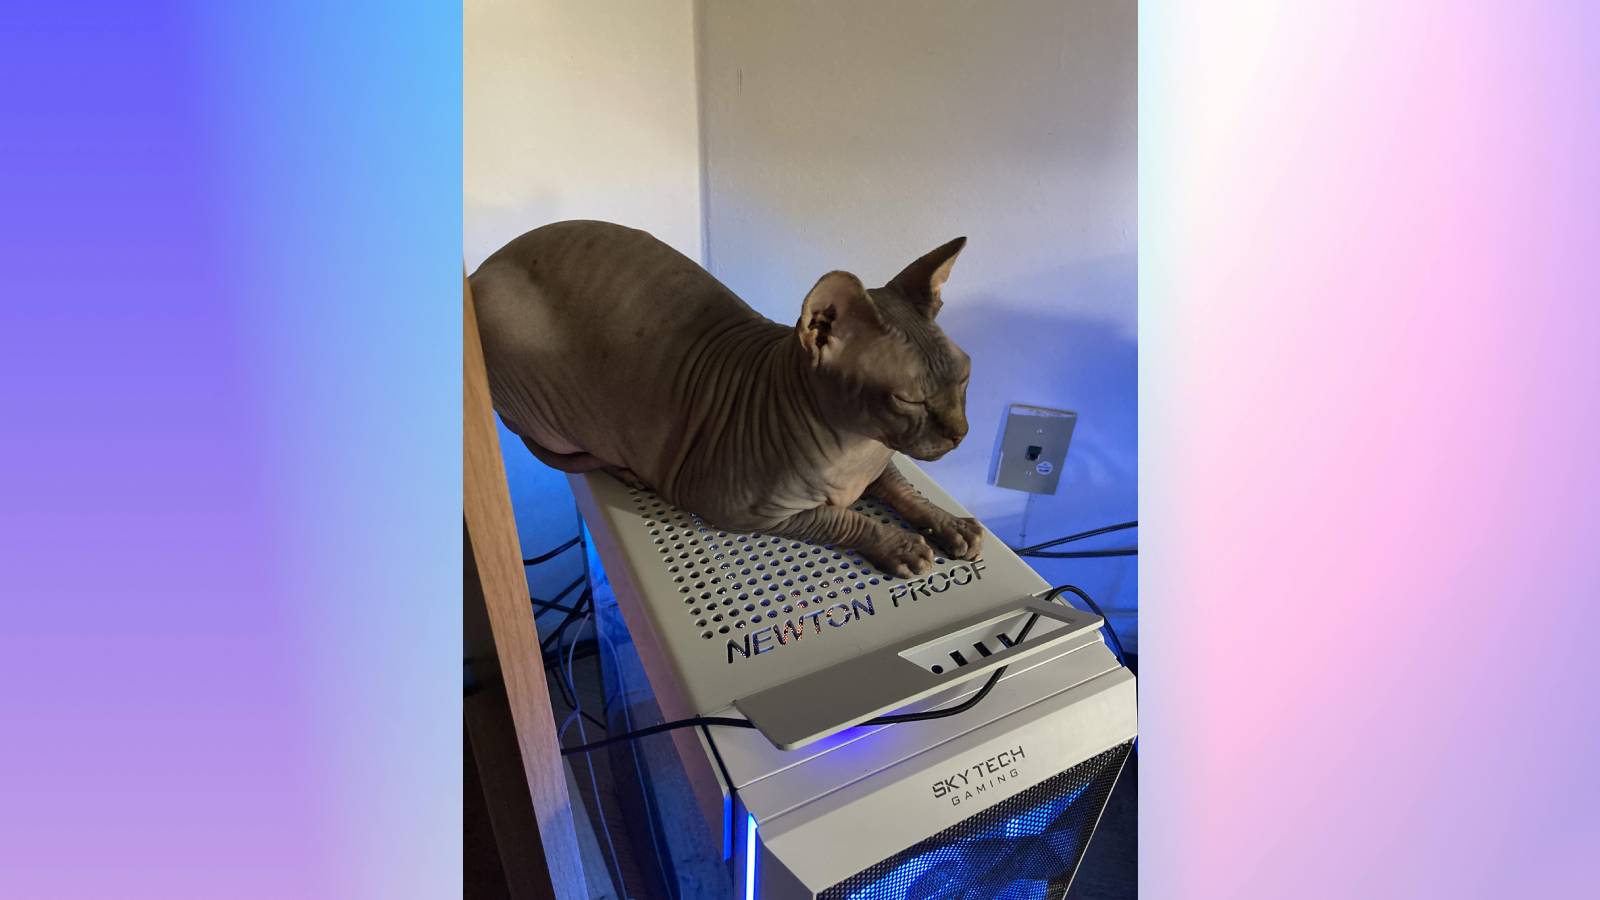 Happy cat sleeps on a plate protecting the PC